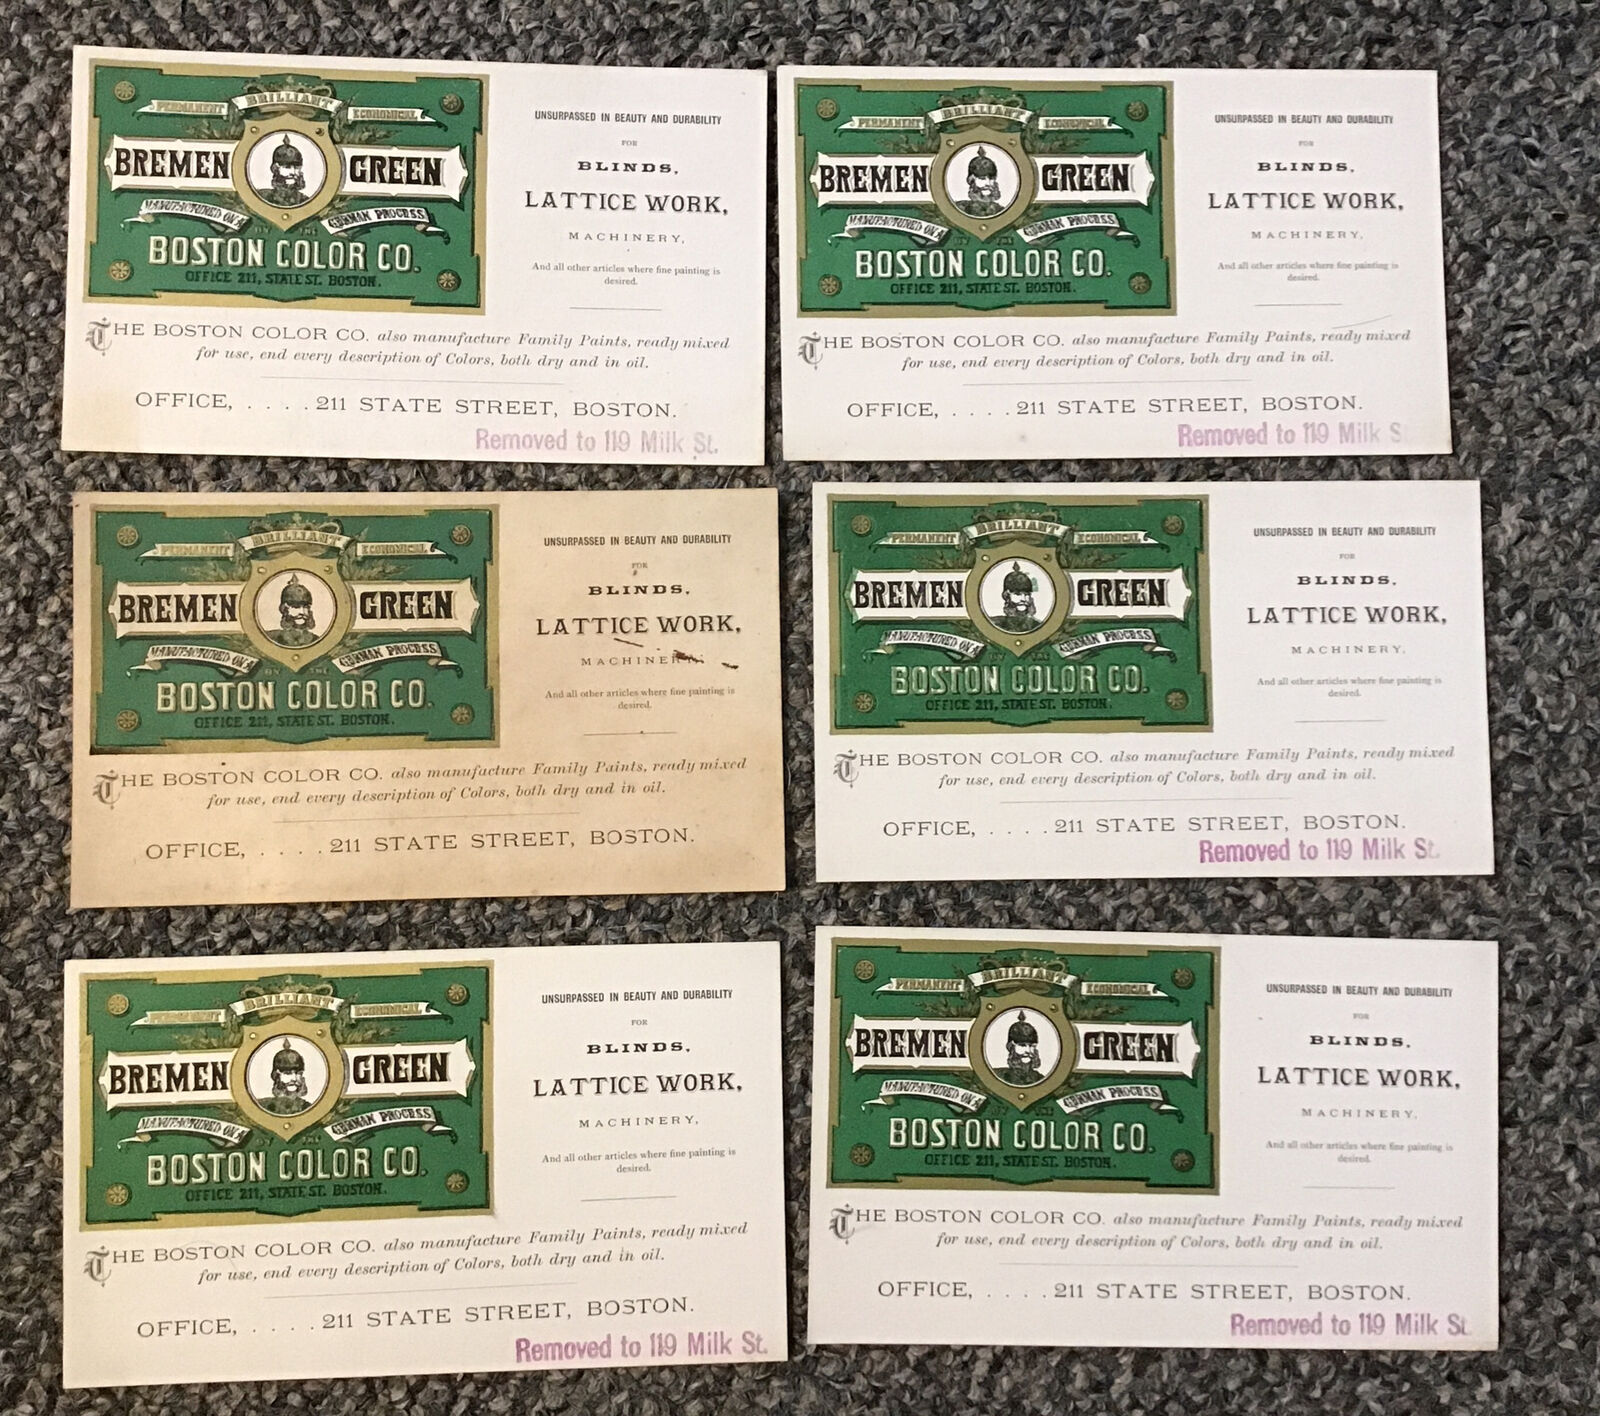 Boston Color Co Bremen Green German Process Paint Advertising Card Lot Of 6